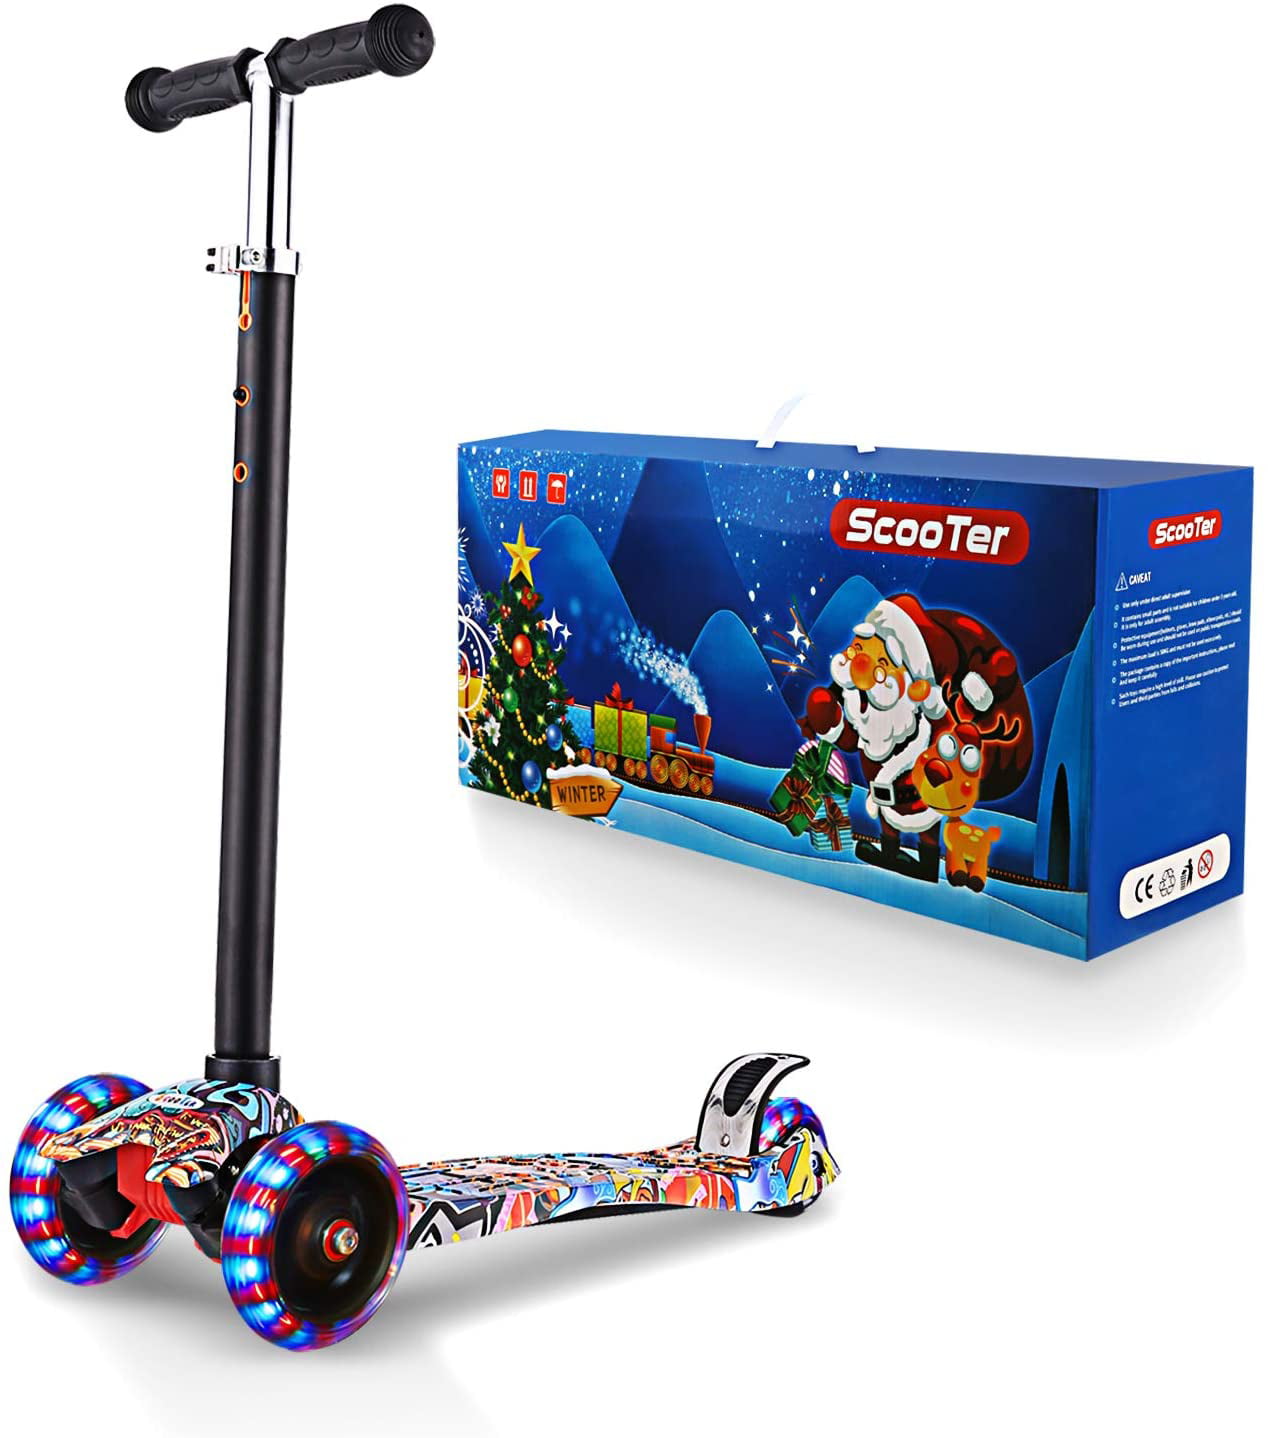 Hikole Scooter for Kids Adjustable Height Scooter for Children Ages 3-12 Kick Scooter for Toddlers Girls & Boys with LED Light Up Scooters Wheels